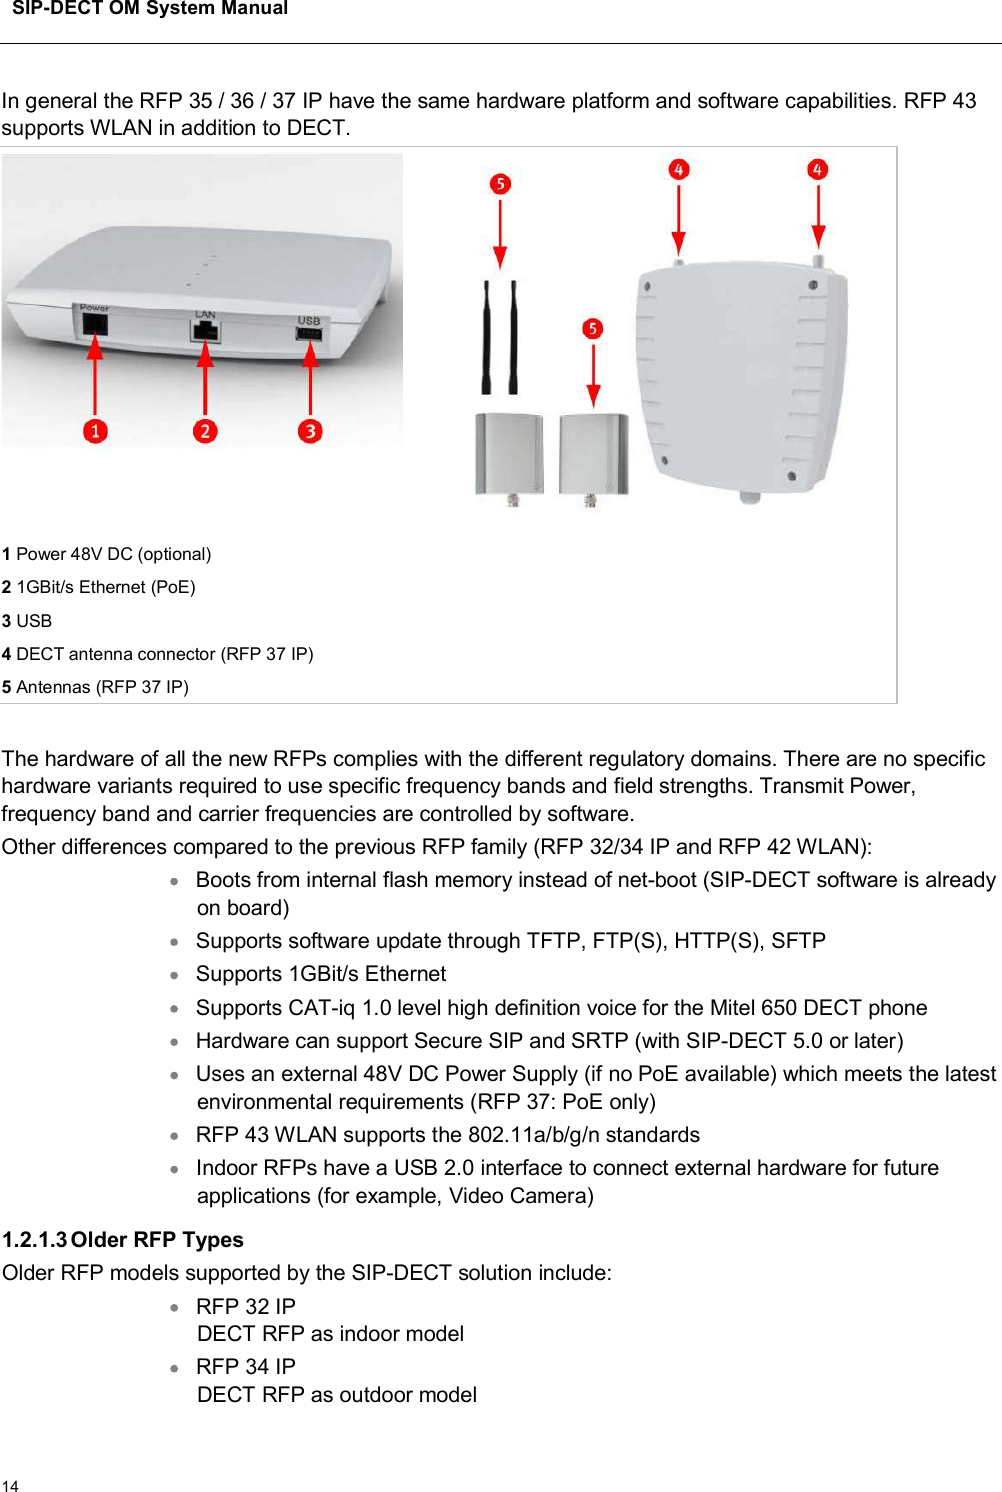 SIP-DECT OM System Manual14In general the RFP 35 / 36 / 37 IP have the same hardware platform and software capabilities. RFP 43supports WLAN in addition to DECT.1Power 48V DC (optional)21GBit/s Ethernet (PoE)3USB4DECT antenna connector (RFP 37 IP)5Antennas (RFP 37 IP)The hardware of all the new RFPs complies with the different regulatory domains. There are no specific hardware variants required to use specific frequency bands and field strengths. Transmit Power, frequency band and carrier frequencies are controlled by software.Other differences compared to the previous RFP family (RFP 32/34 IP and RFP 42 WLAN):Boots from internal flash memory instead of net-boot (SIP-DECT software is already on board) Supports software update through TFTP, FTP(S), HTTP(S), SFTP Supports 1GBit/s Ethernet Supports CAT-iq 1.0 level high definition voice for the Mitel 650 DECT phone Hardware can support Secure SIP and SRTP (with SIP-DECT 5.0 or later) Uses an external 48V DC Power Supply (if no PoE available) which meets the latest environmental requirements (RFP 37: PoE only) RFP 43 WLAN supports the 802.11a/b/g/n standards Indoor RFPs have a USB 2.0 interface to connect external hardware for future applications (for example, Video Camera)1.2.1.3Older RFP TypesOlder RFP models supported by the SIP-DECT solution include:RFP 32 IP DECT RFP as indoor model RFP 34 IPDECT RFP as outdoor model 